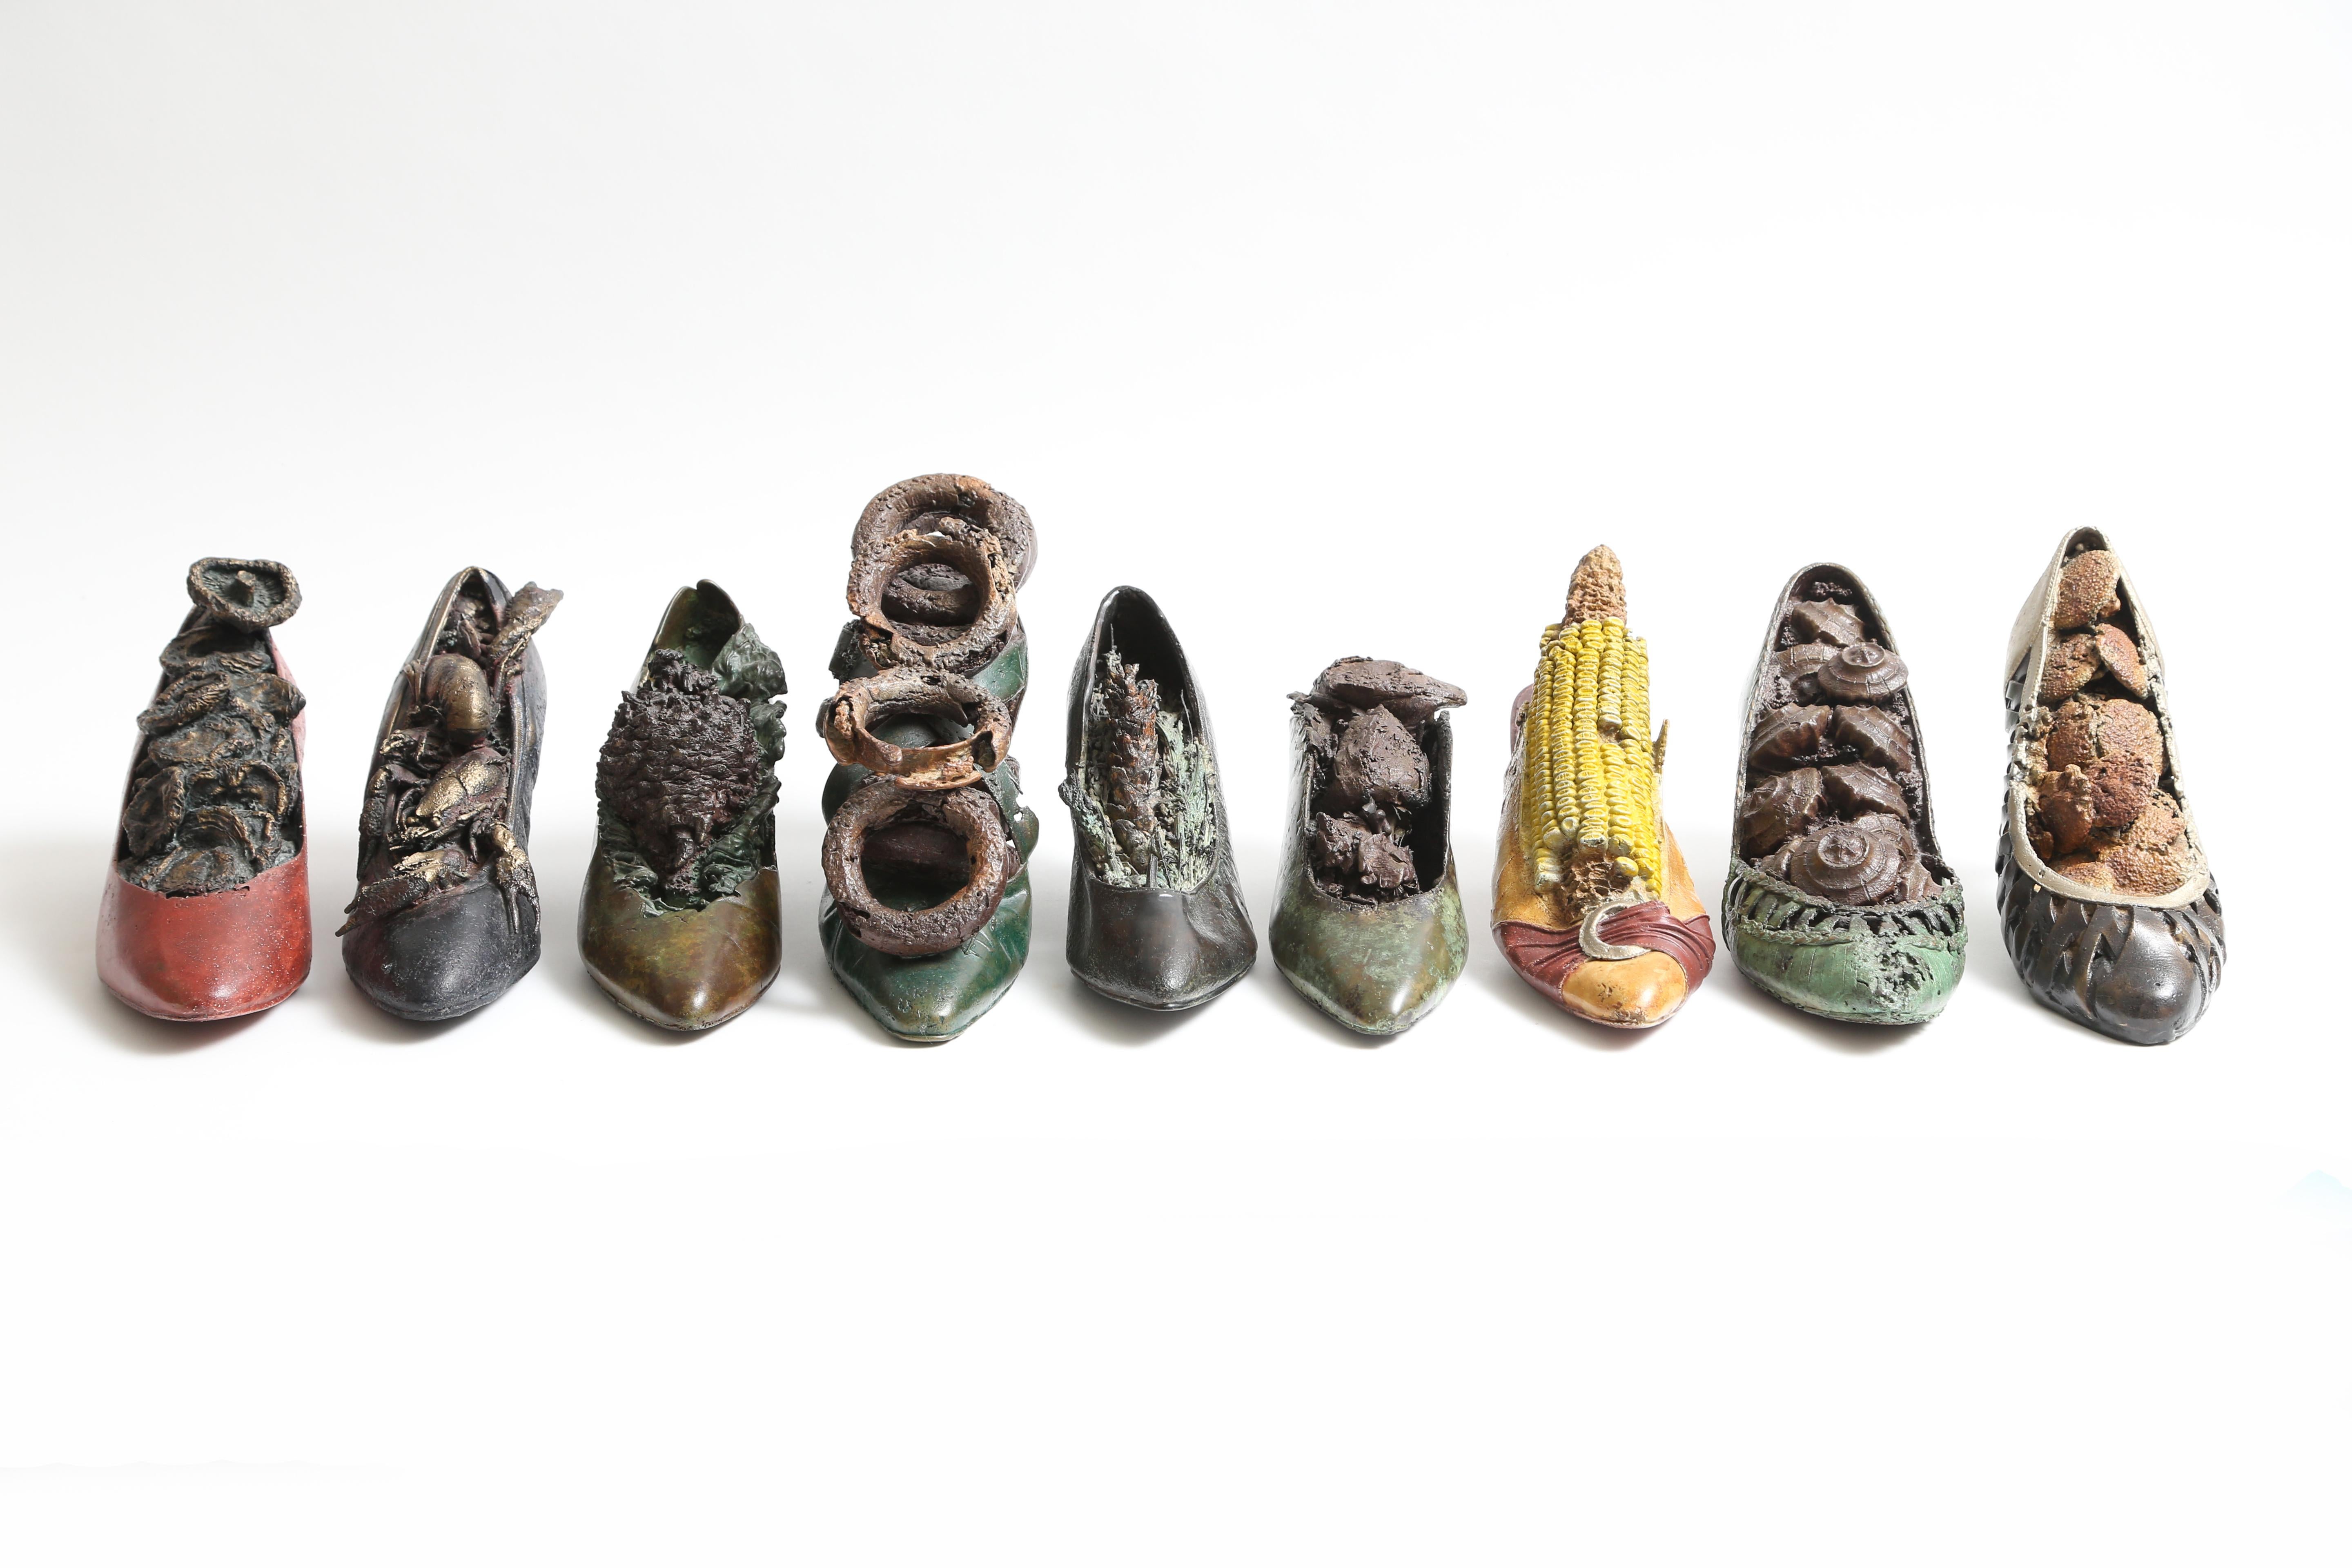 A whimsical collection of 9 sculptures.
Hand-painted bronze
Some sculptures signed
Sold in sets of three, each set will have 1 signed shoe.